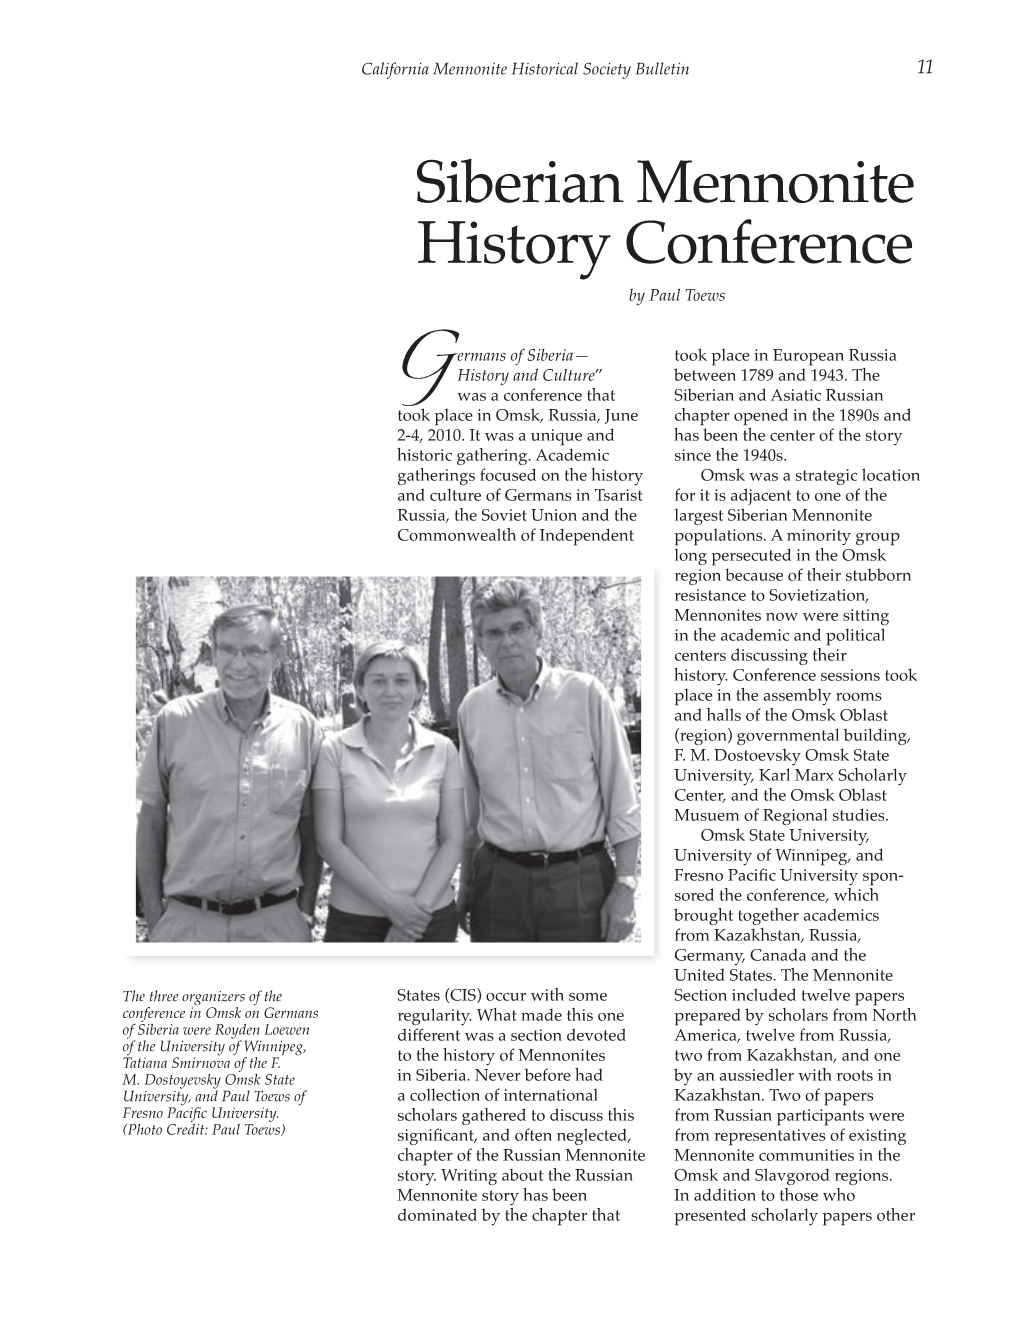 Siberian Mennonite History Conference by Paul Toews